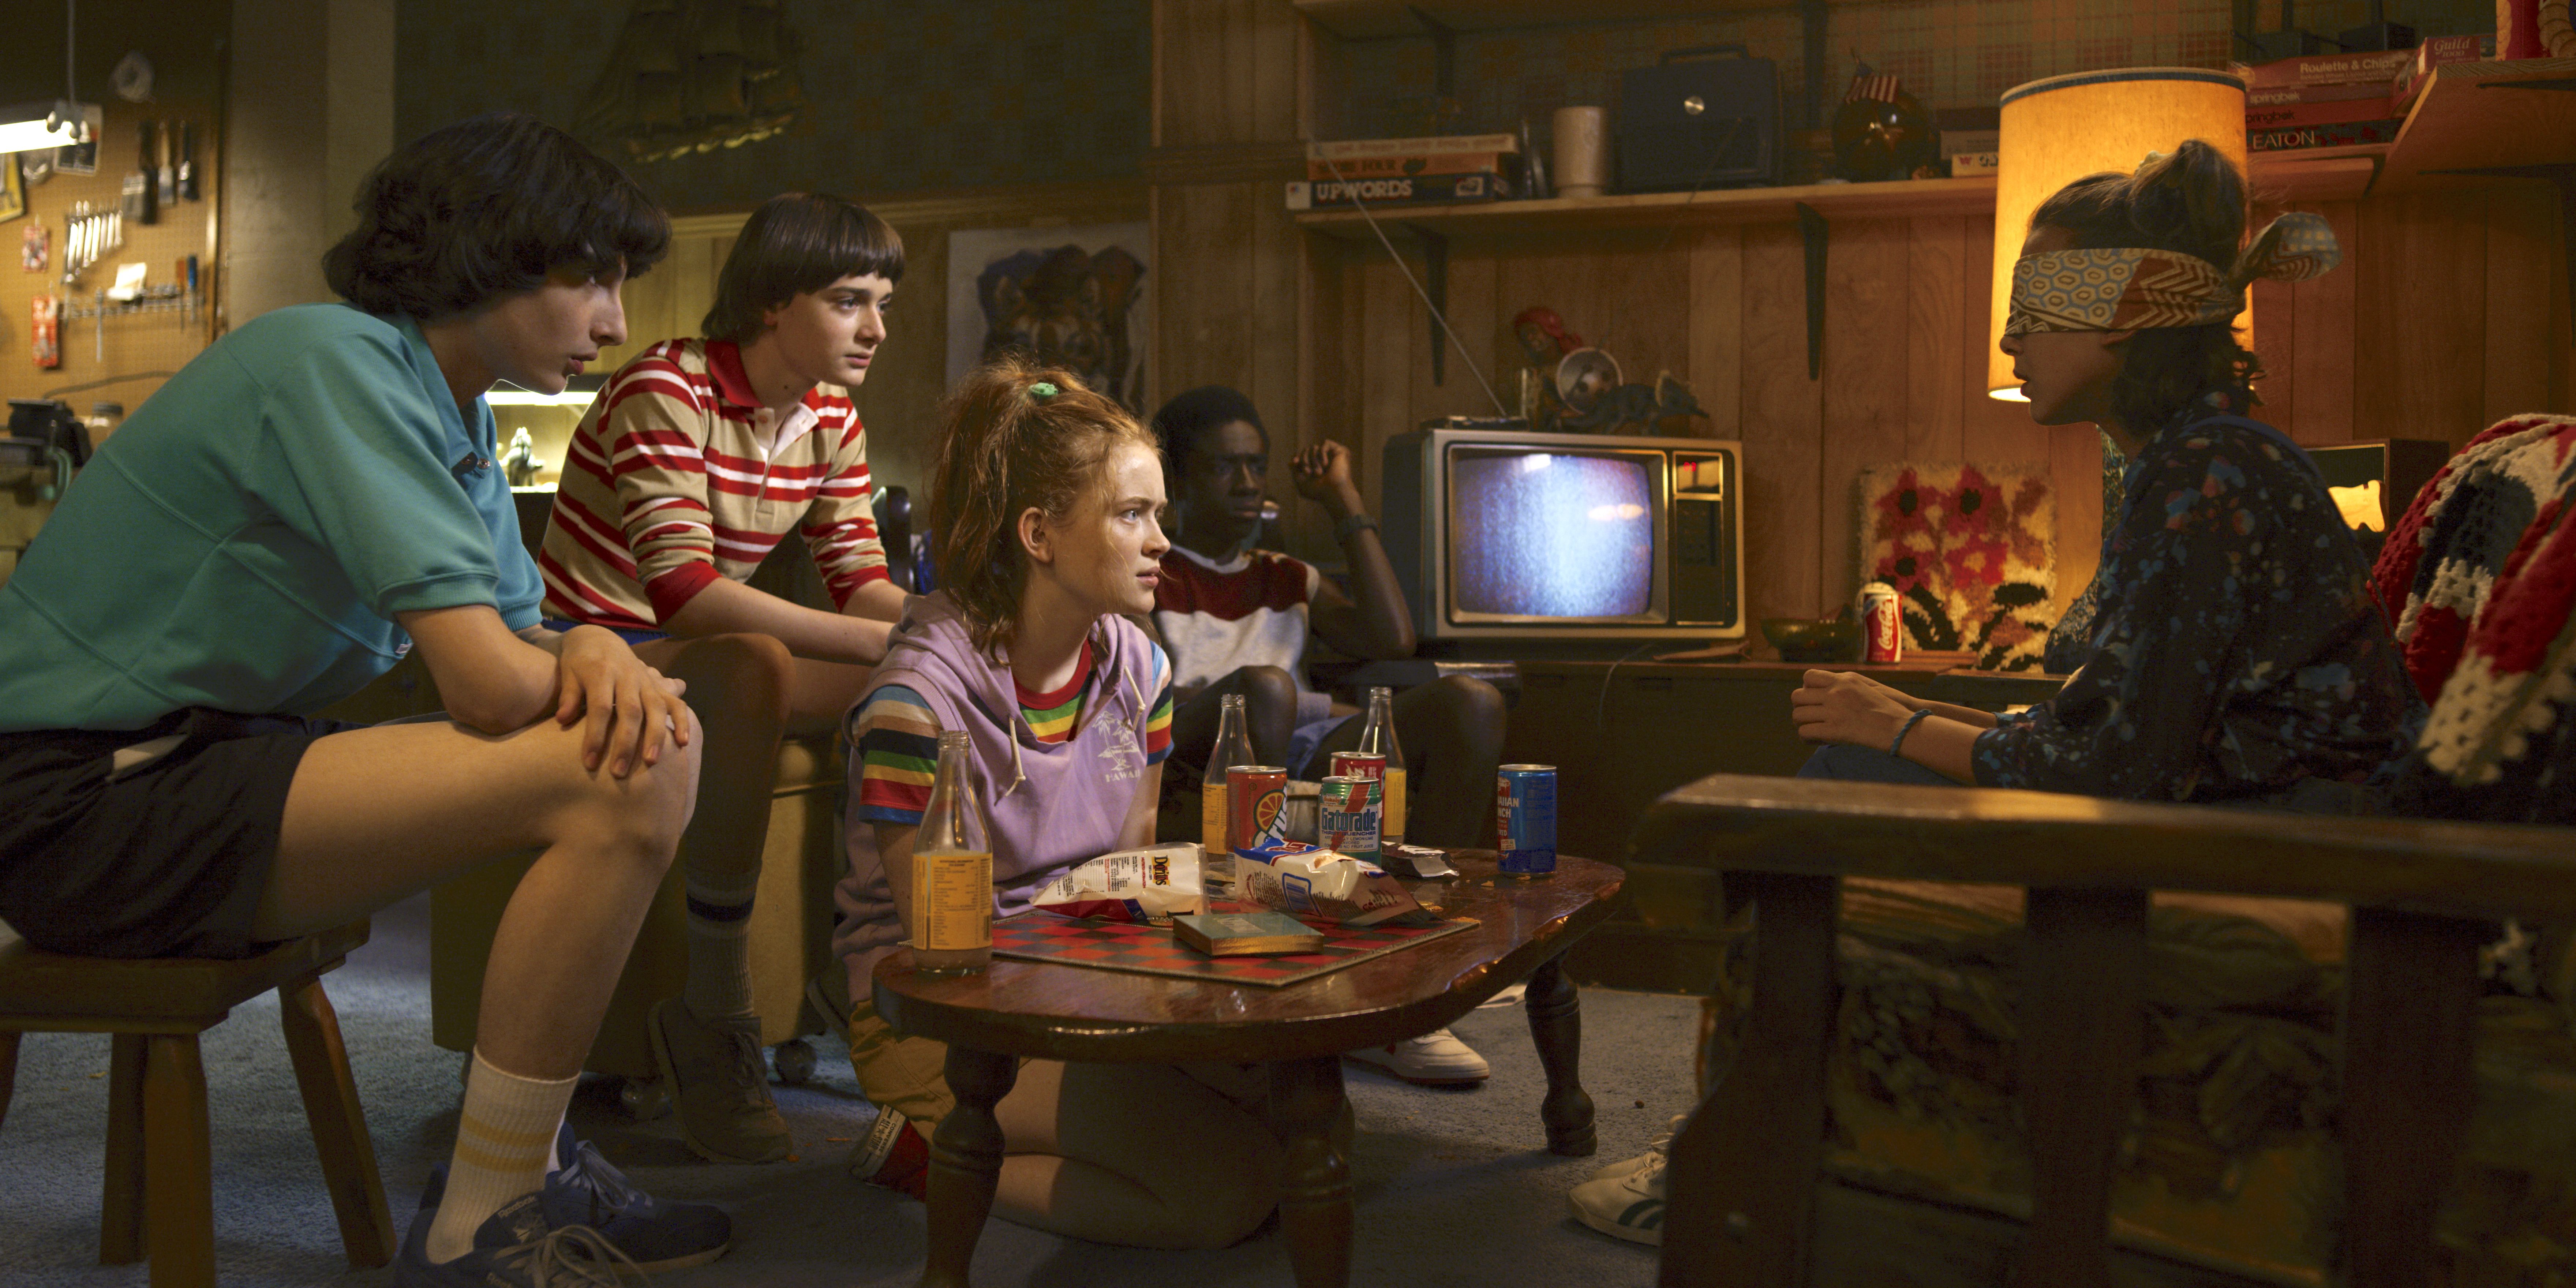 Stream episode Stranger Things - Season Three. by We Are the Watchers of  Movies podcast